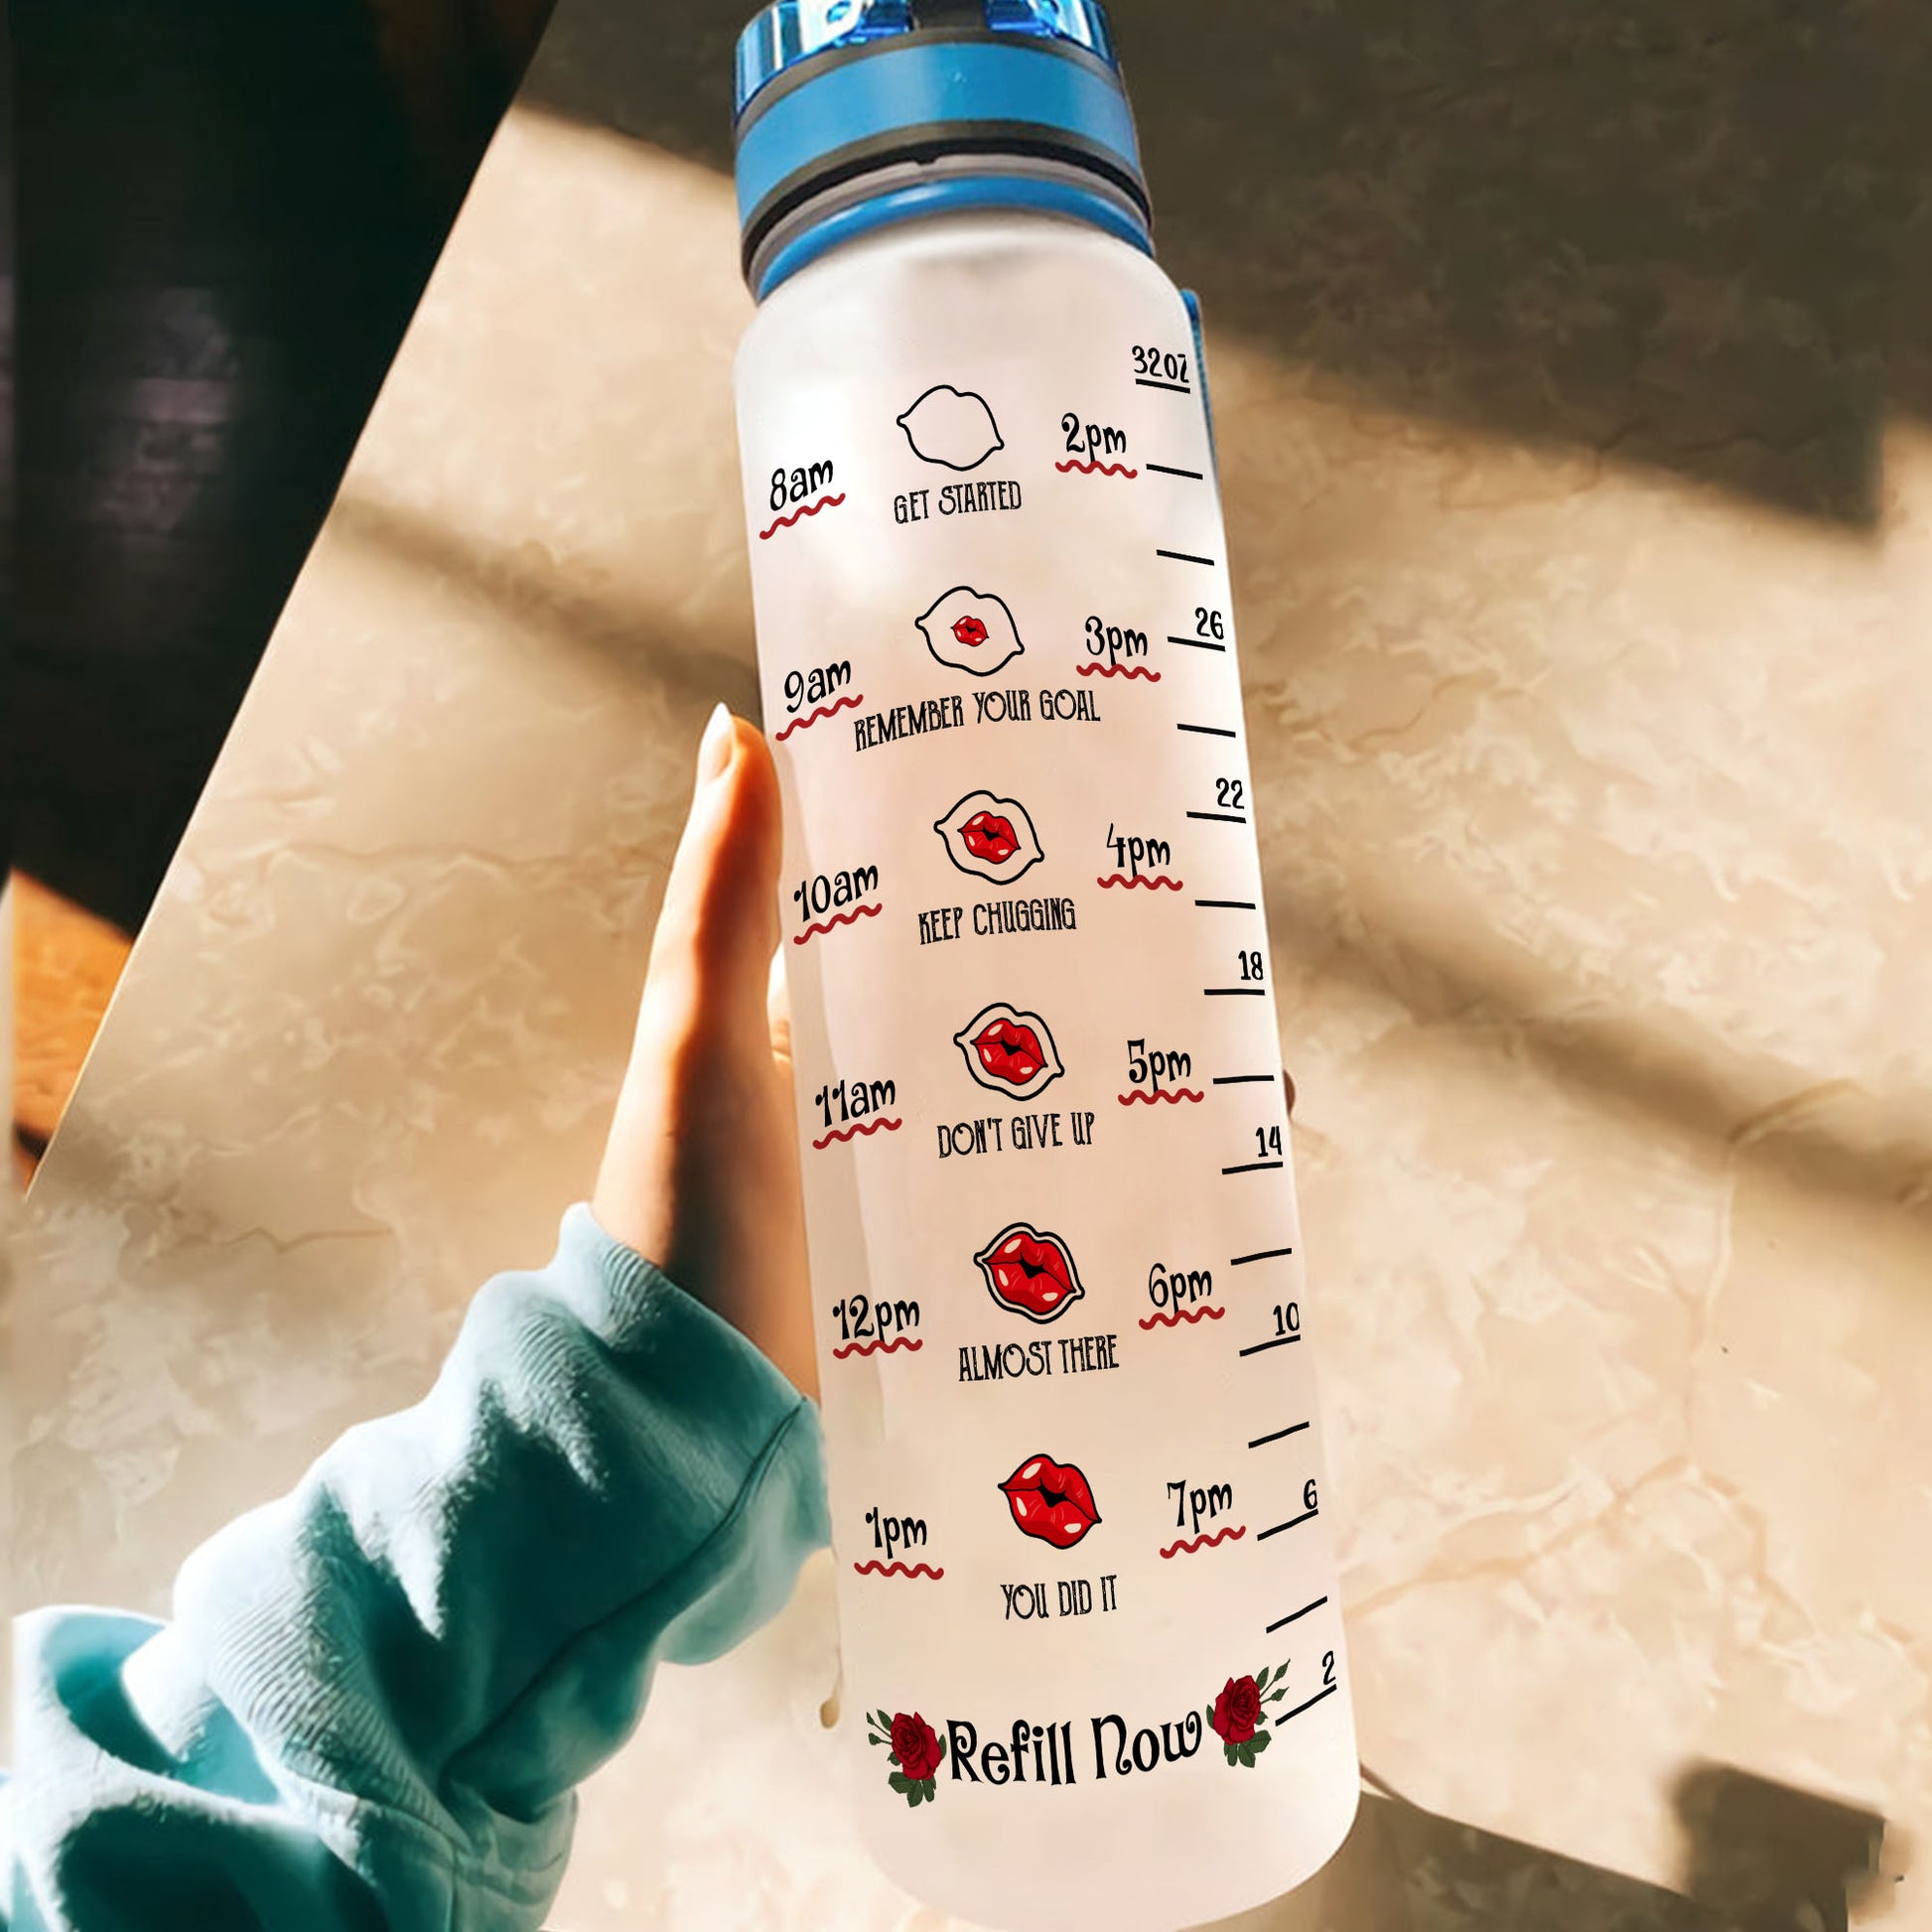 Girl Drink Your Water - Personalized Water Tracker Bottle – Macorner